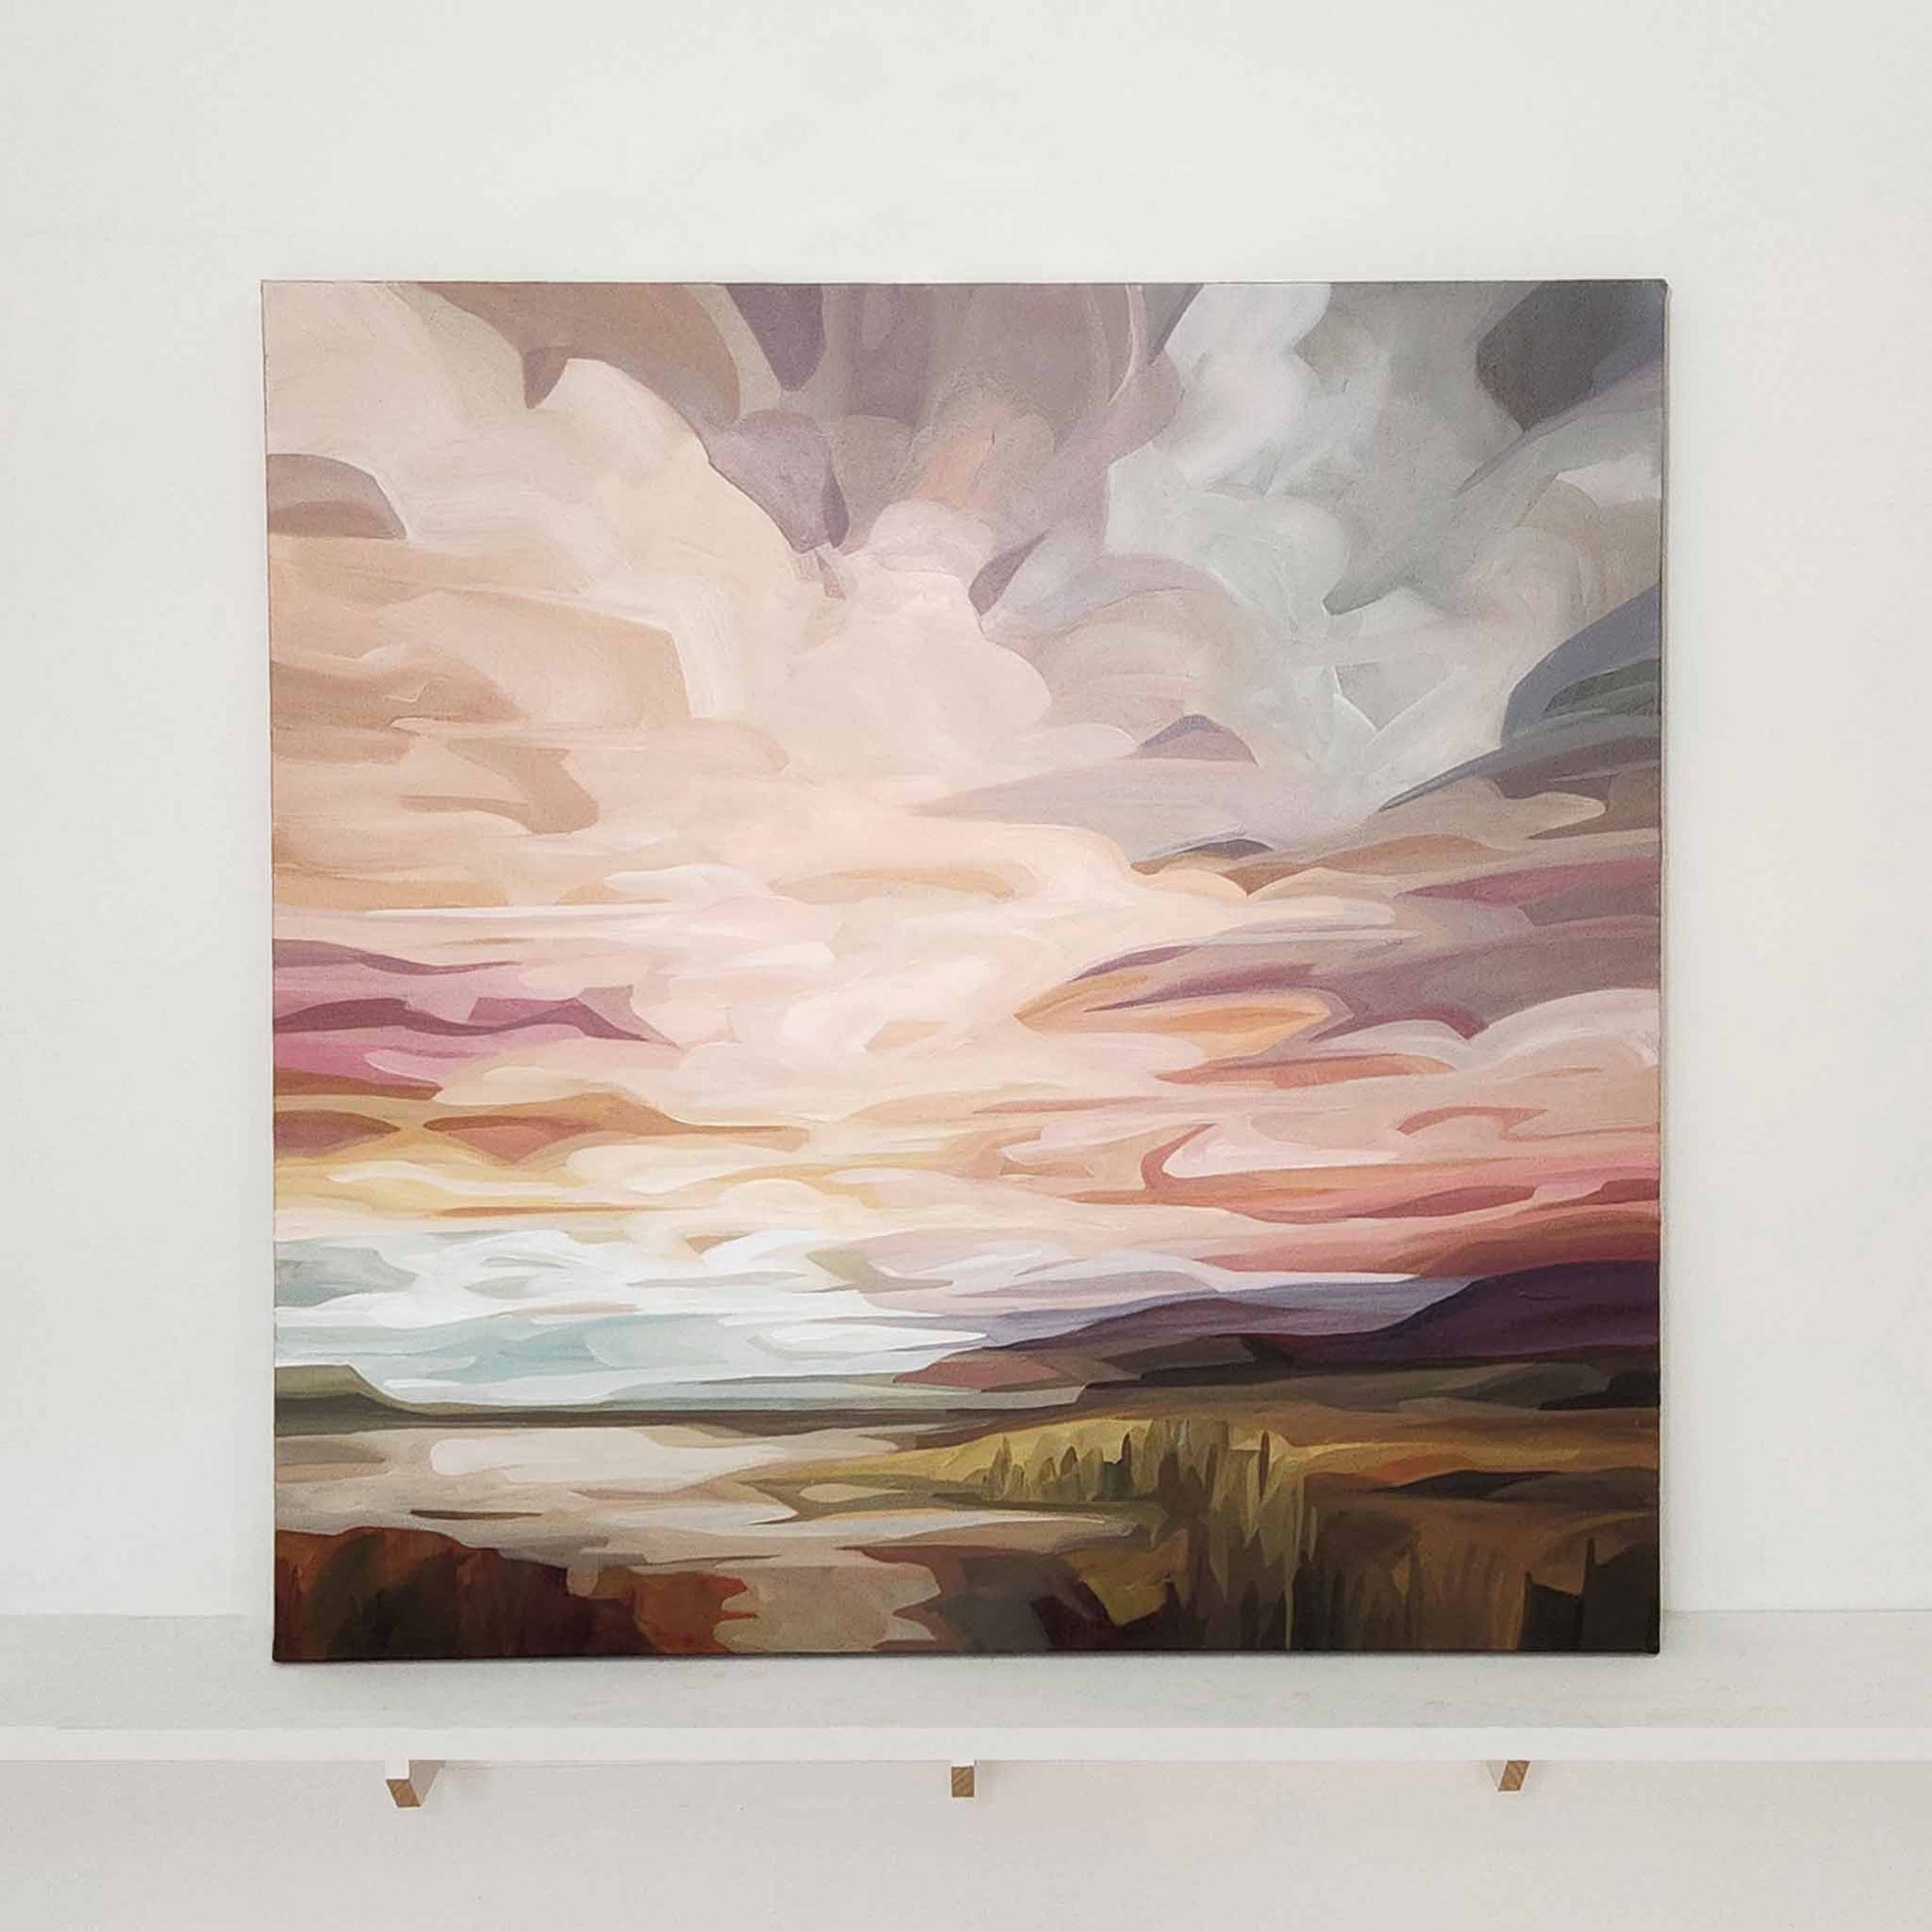 large desert sunrise painting of a peach and mauve sky